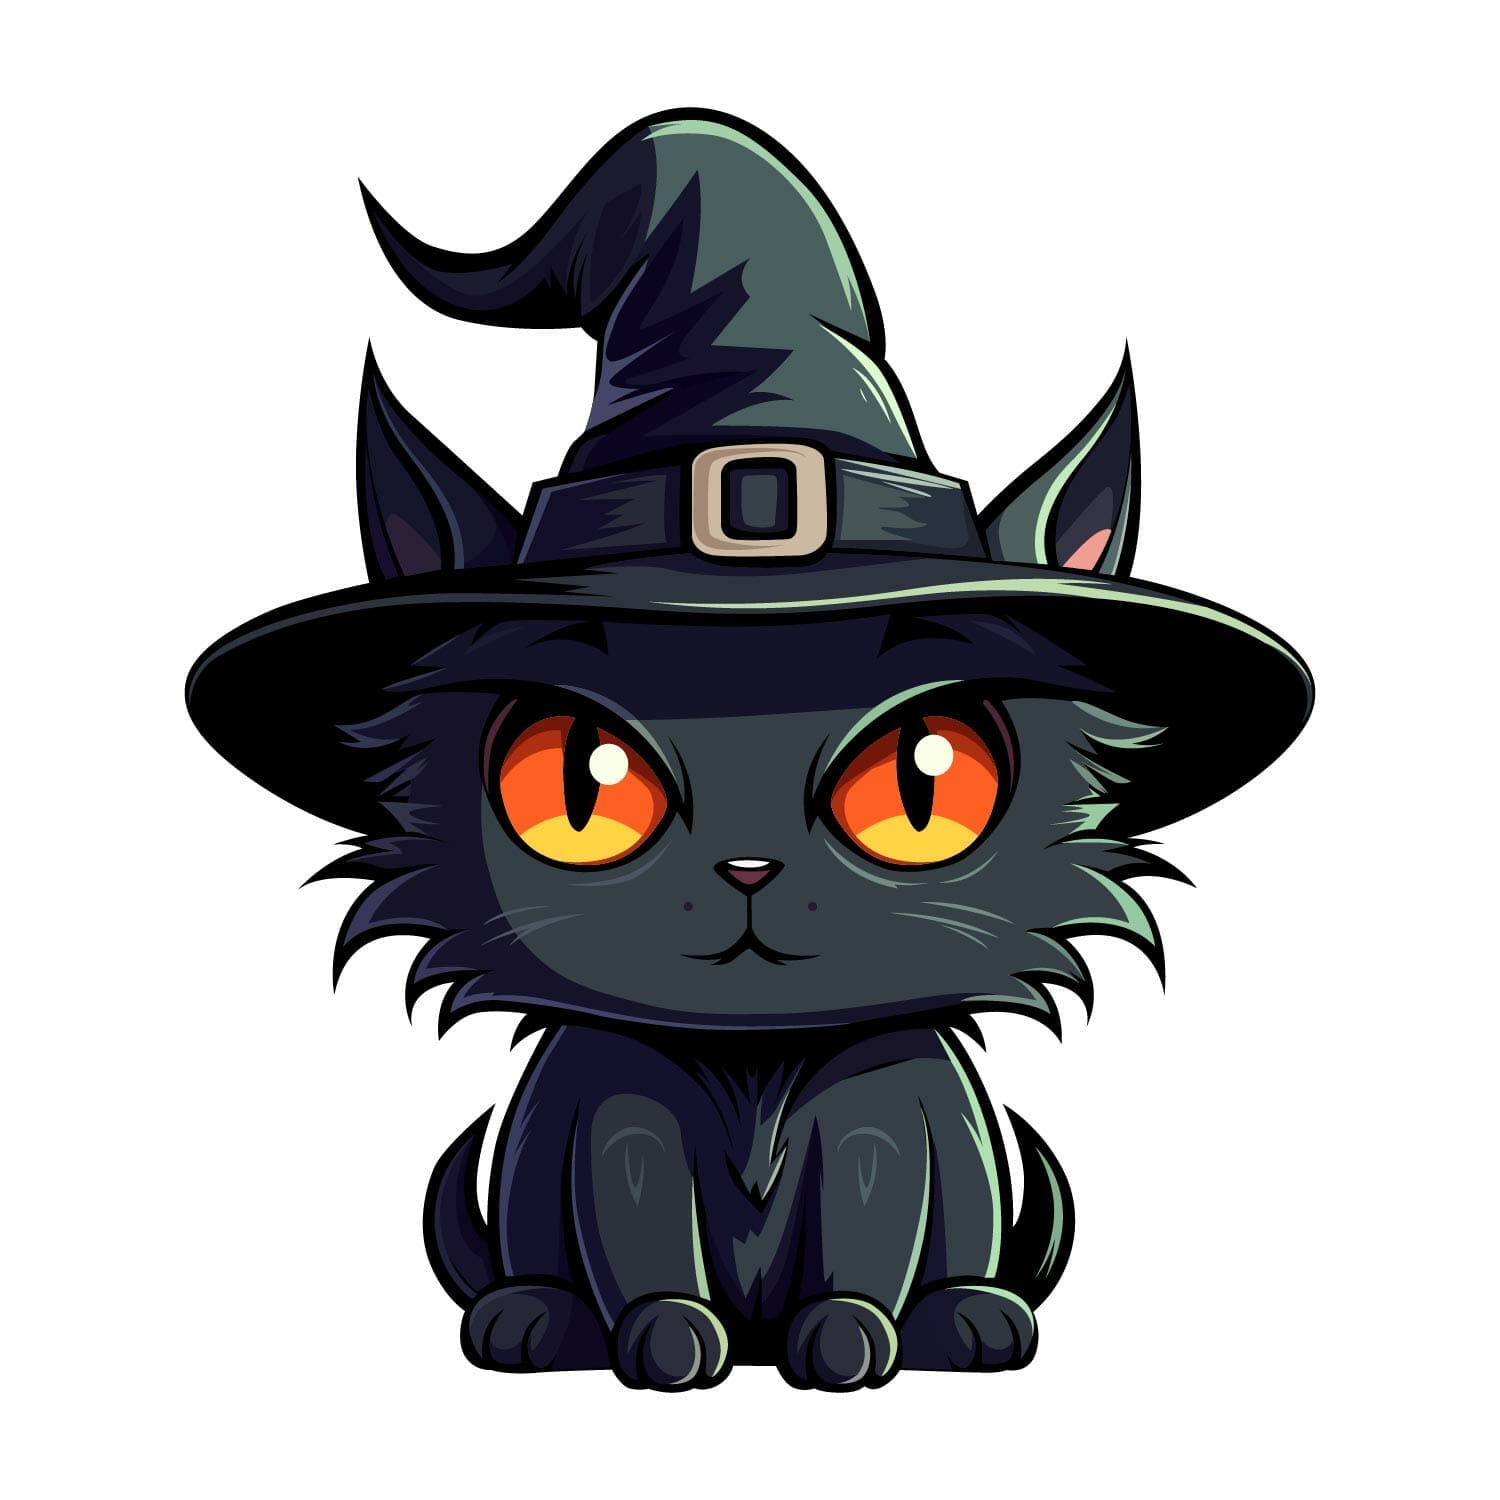 Halloween Themed Black Evil Cat With A Witch Hat Vector For T-Shirts